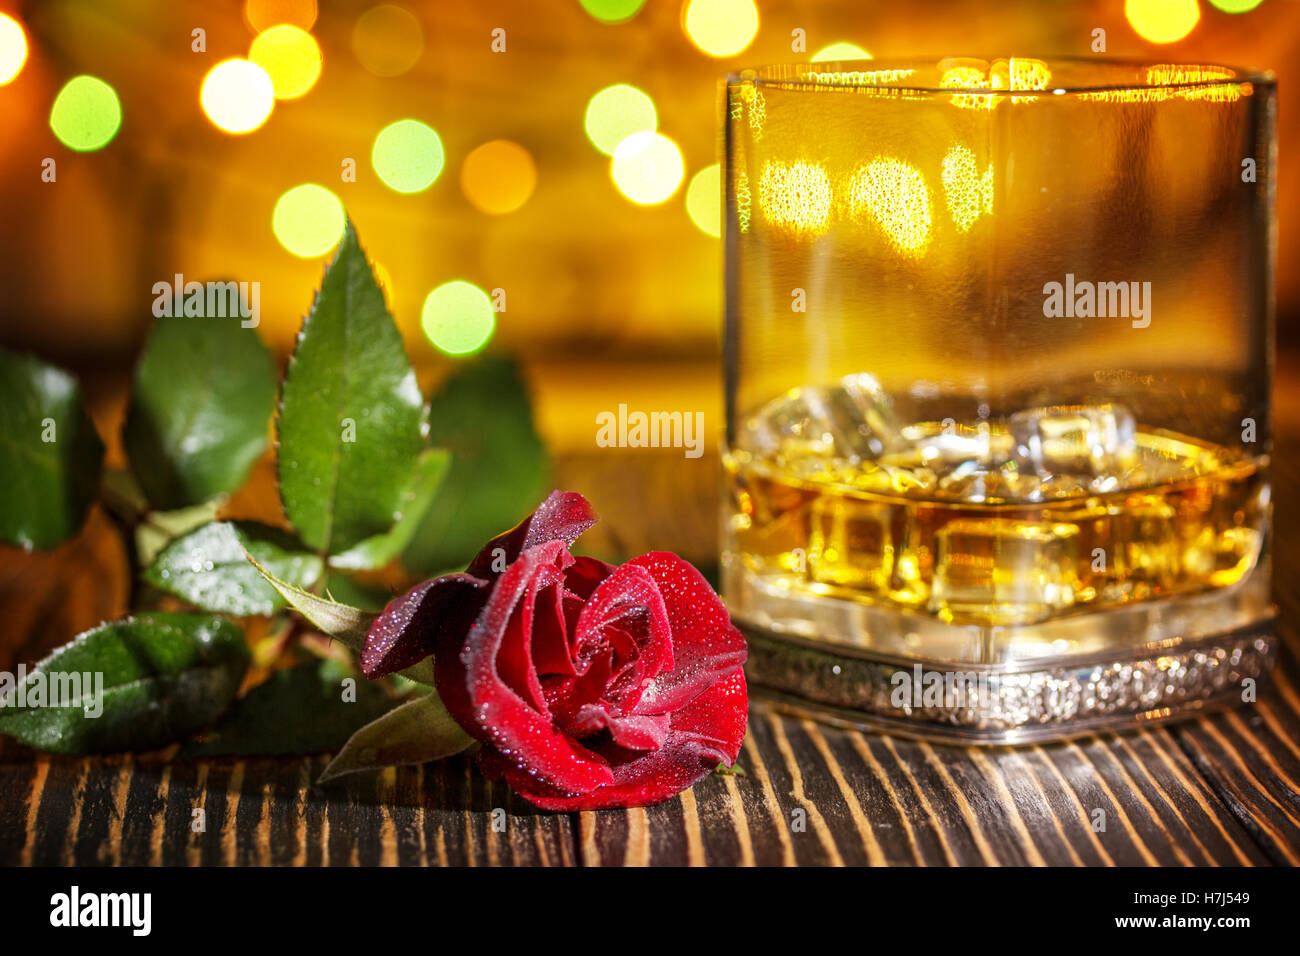 Scotch Rose stock photo - Minden Pictures